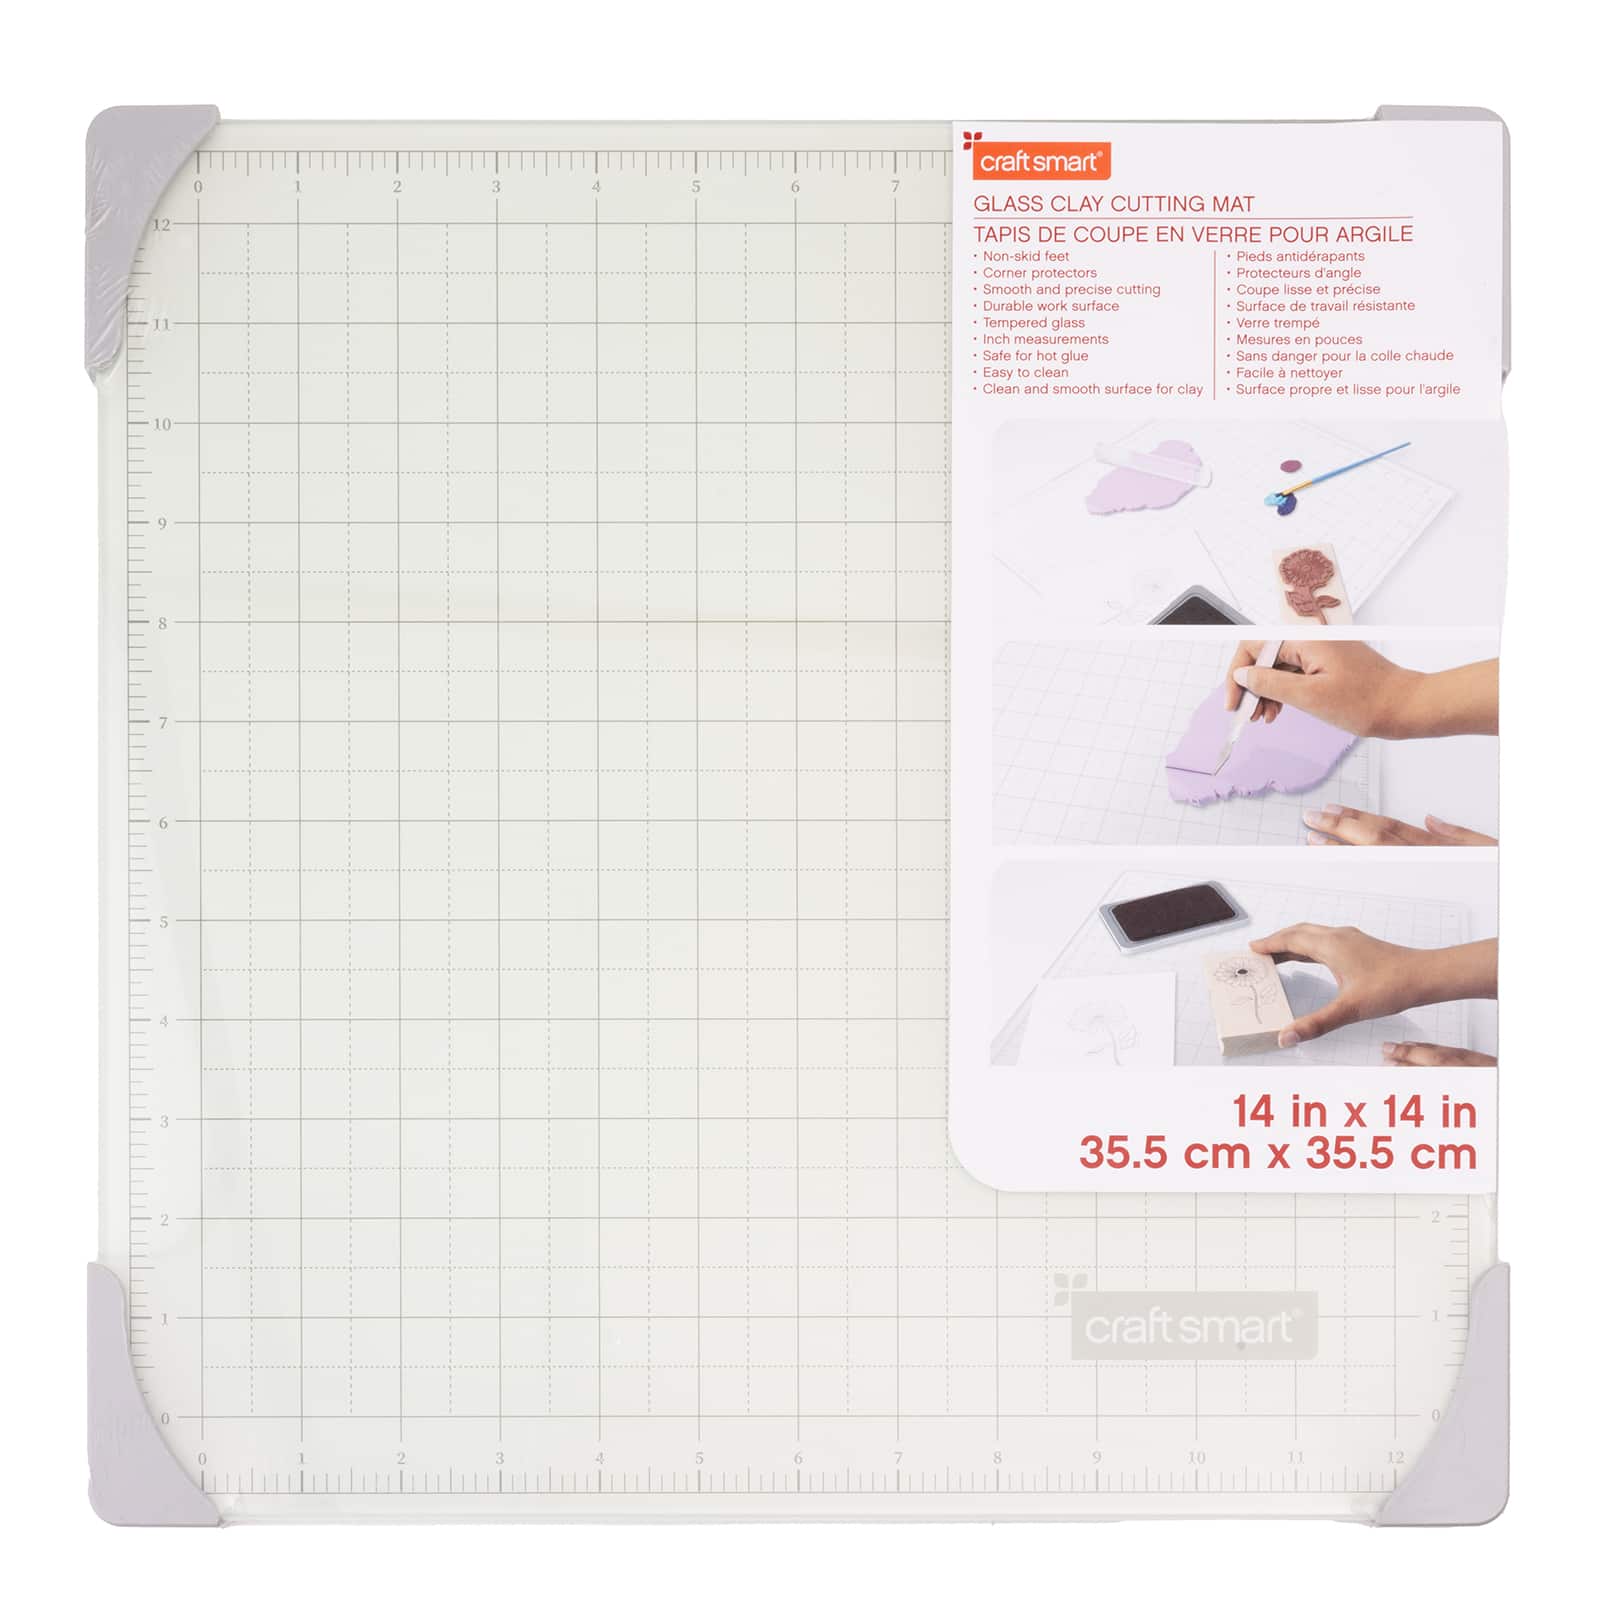 Your Guide to Cutting Mats, Glass Mats, and Other Crafty Work Surfaces